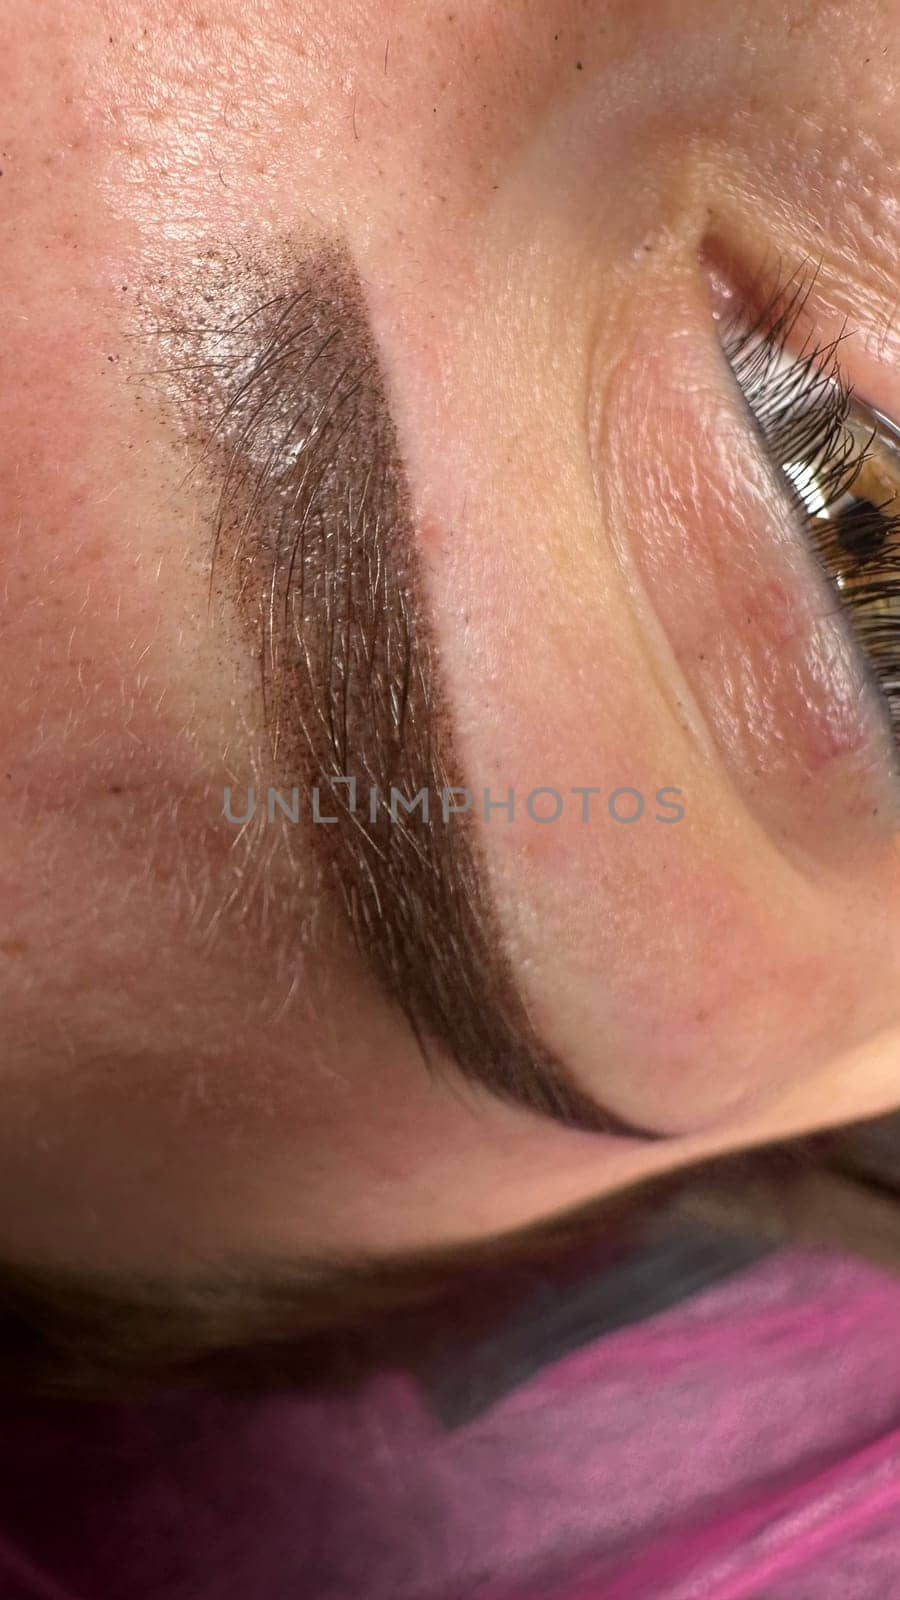 Eyebrows tattoo or Permanent Makeup. by SmirMaxStock